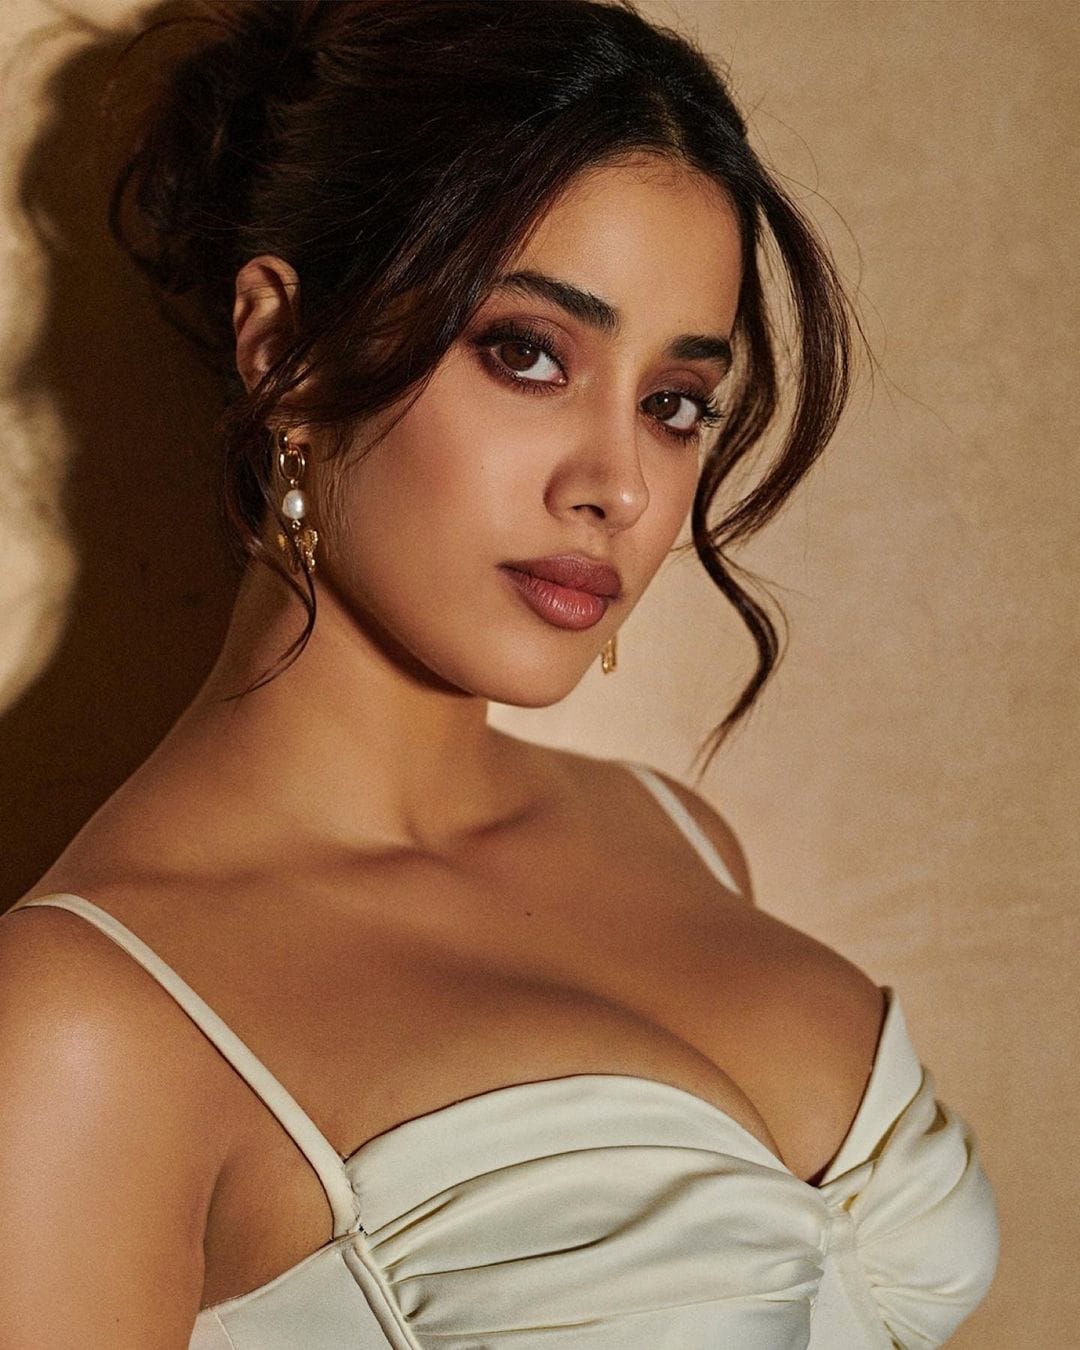 Janhvi Kapoor slays and how in the latest photoshoot